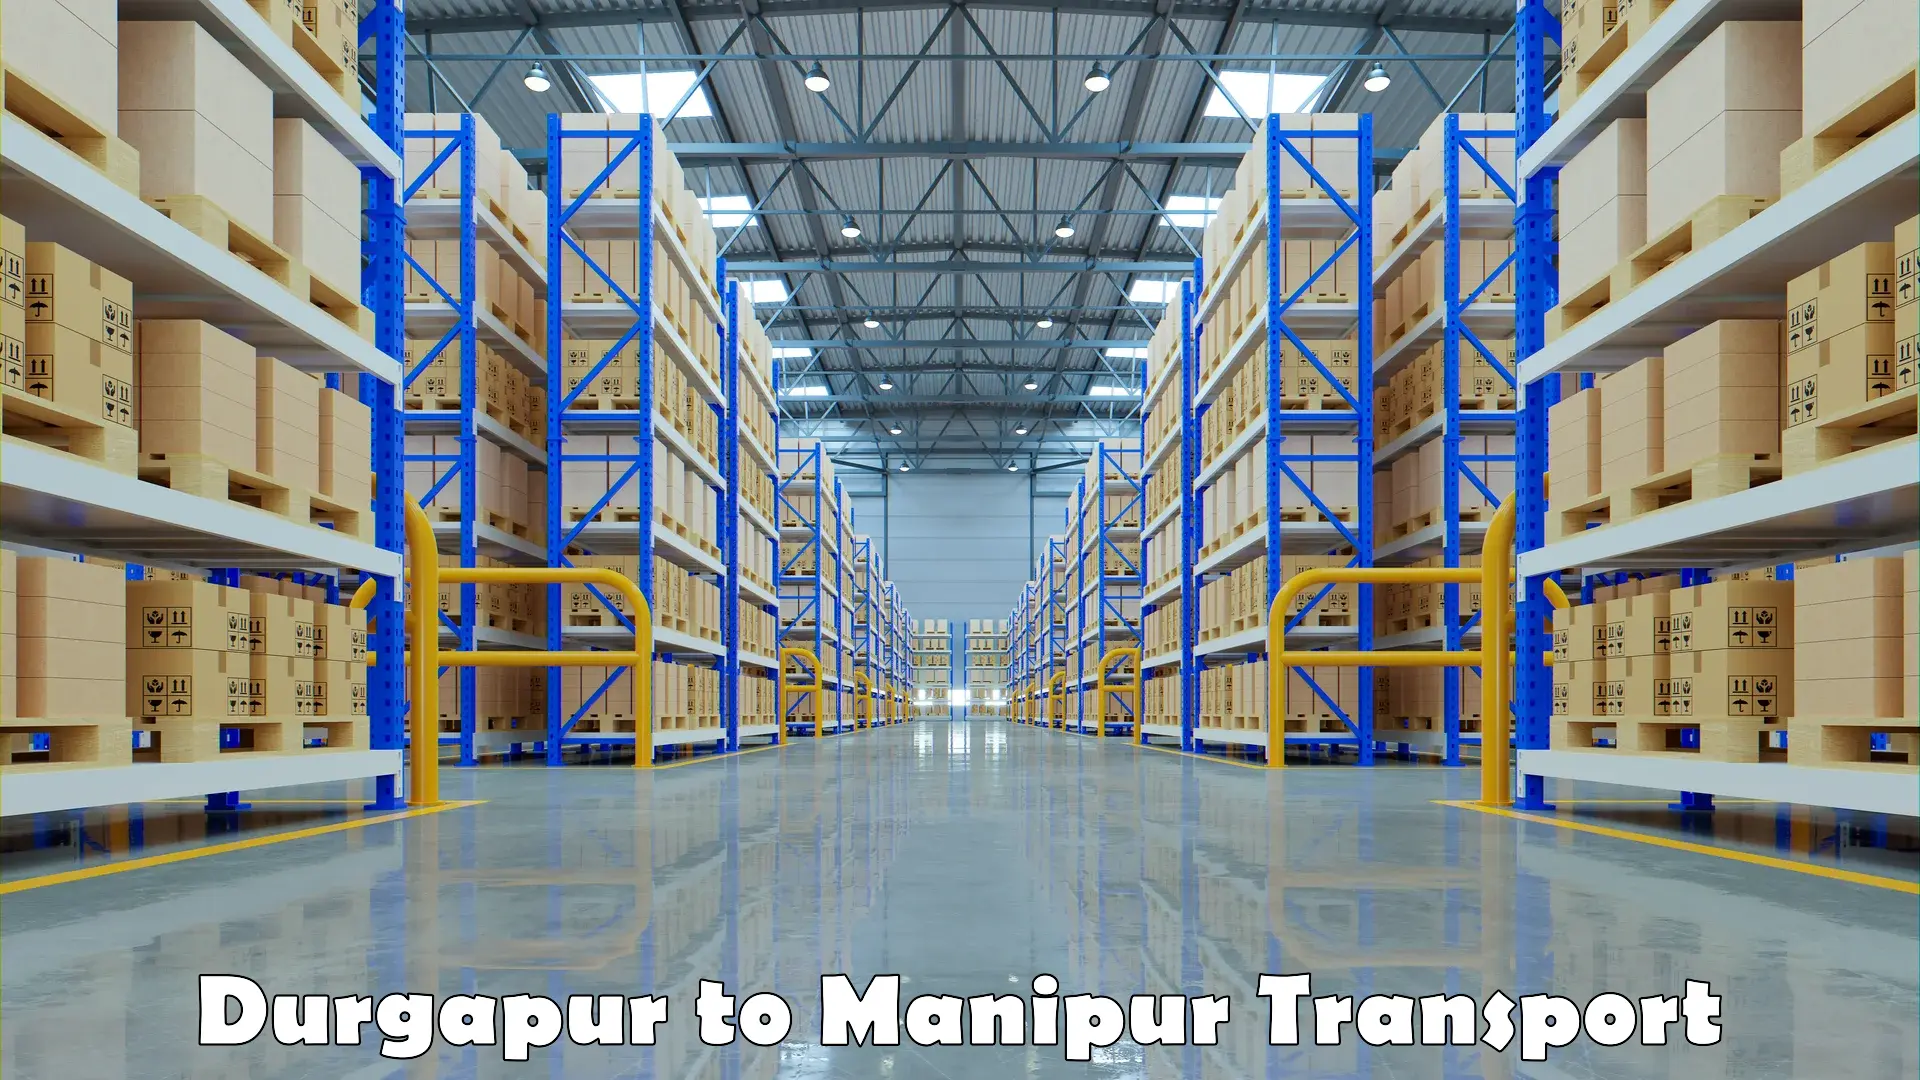 Commercial transport service Durgapur to Manipur